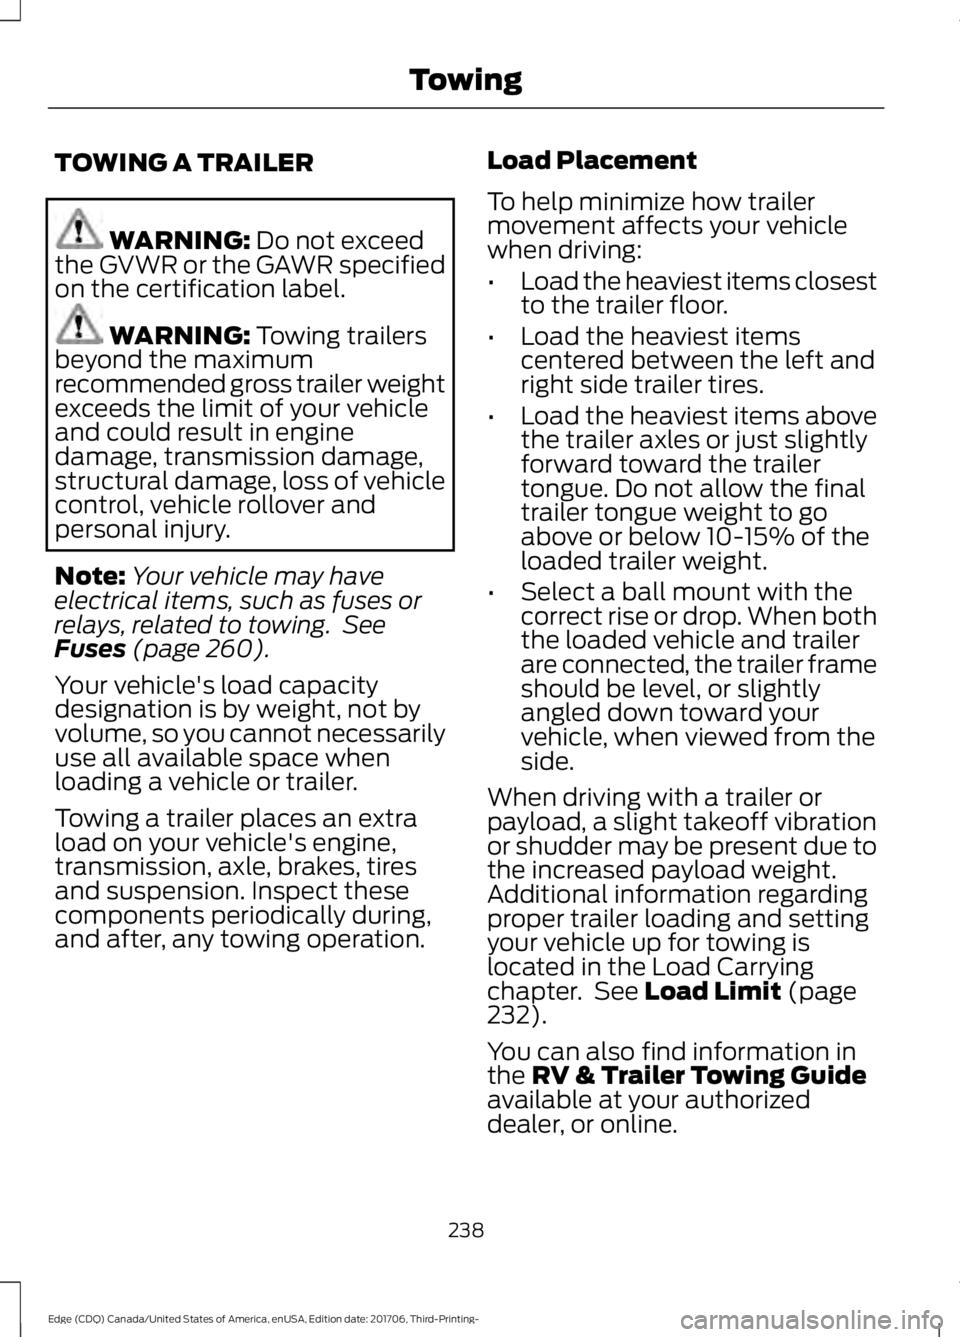 FORD EDGE 2018  Owners Manual TOWING A TRAILER
WARNING: Do not exceed
the GVWR or the GAWR specified
on the certification label. WARNING: 
Towing trailers
beyond the maximum
recommended gross trailer weight
exceeds the limit of yo